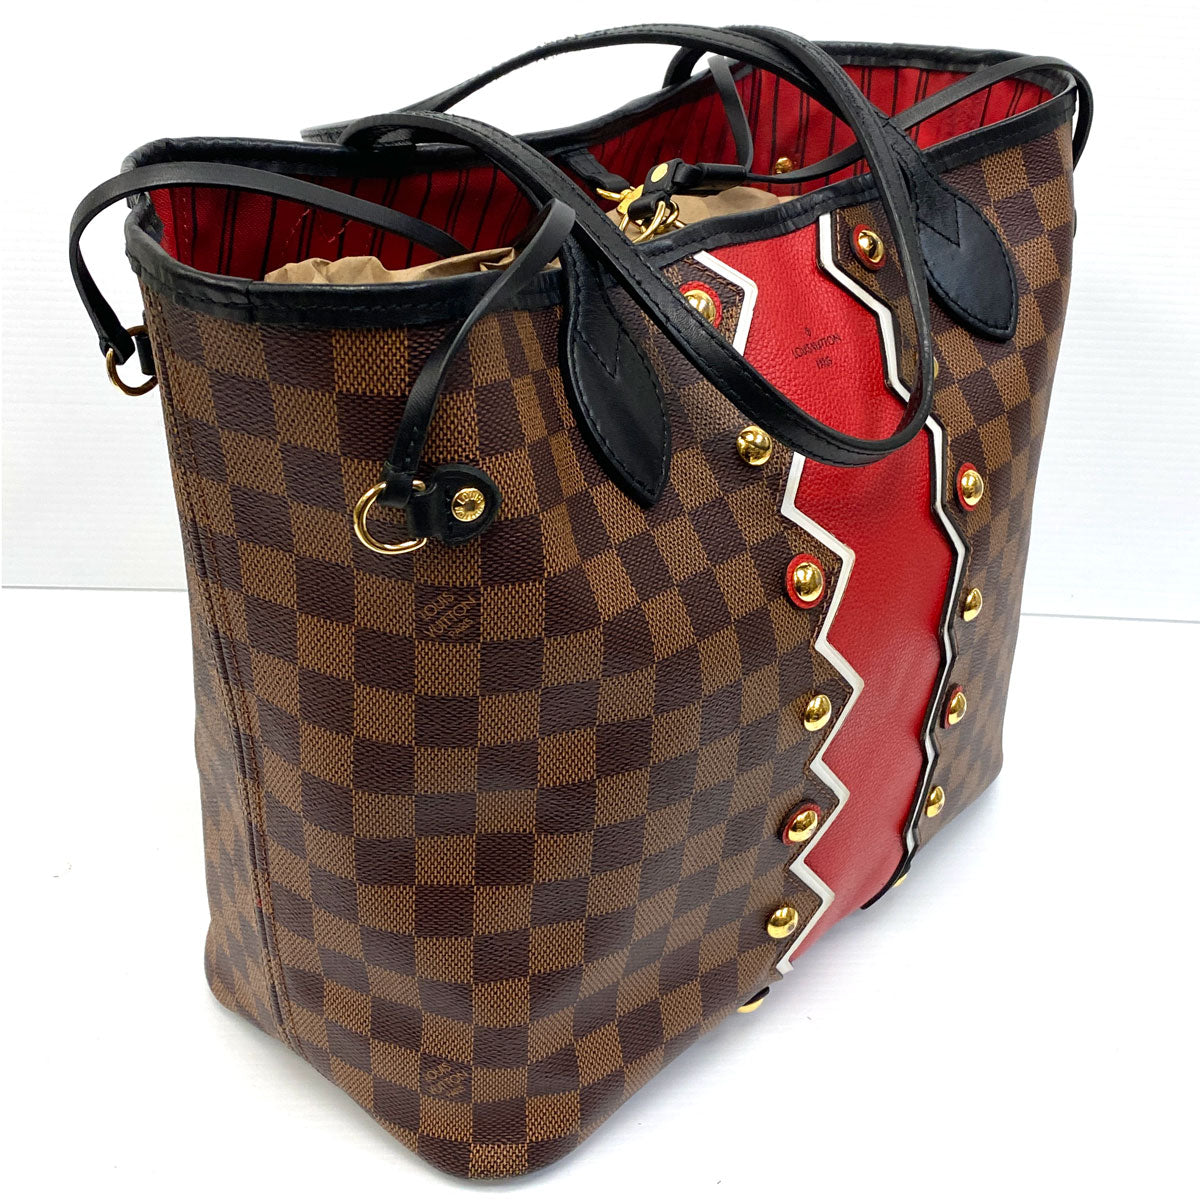 Louis Vuitton Neverfull Bags for sale in Mexico City, Mexico, Facebook  Marketplace